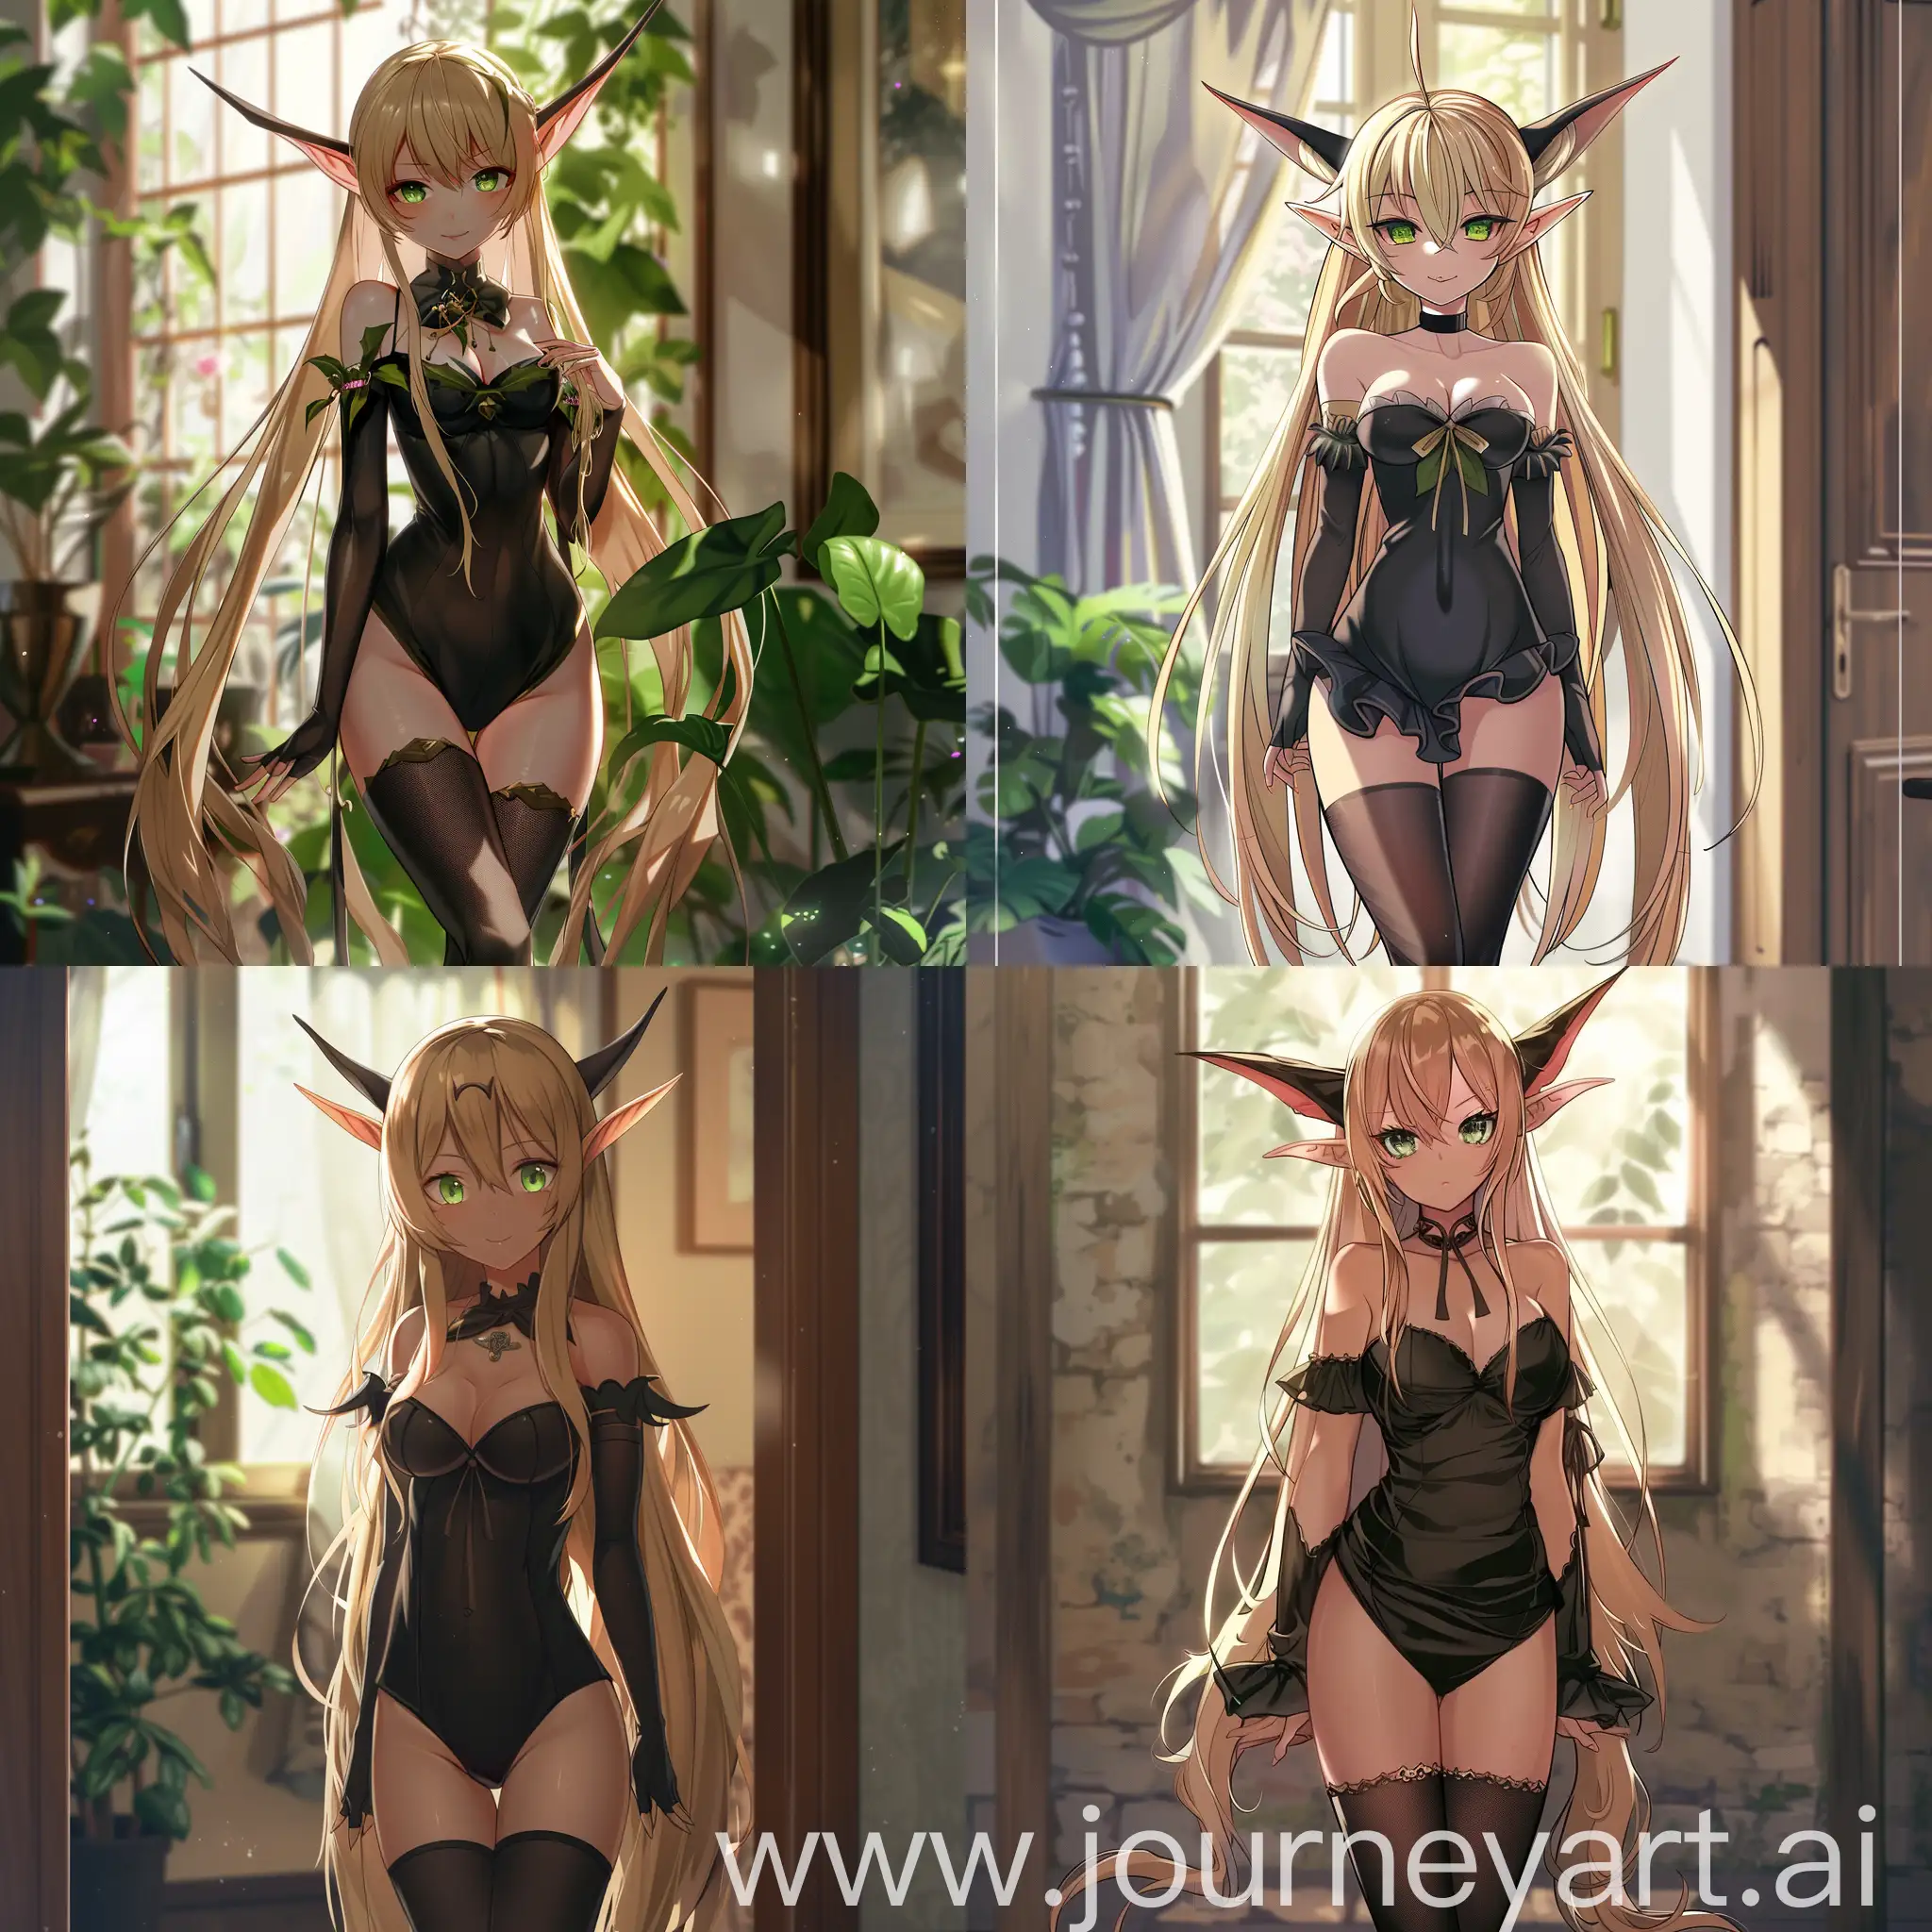 Enchanting-AnimeStyle-Elf-in-Black-Dress-and-Stockings